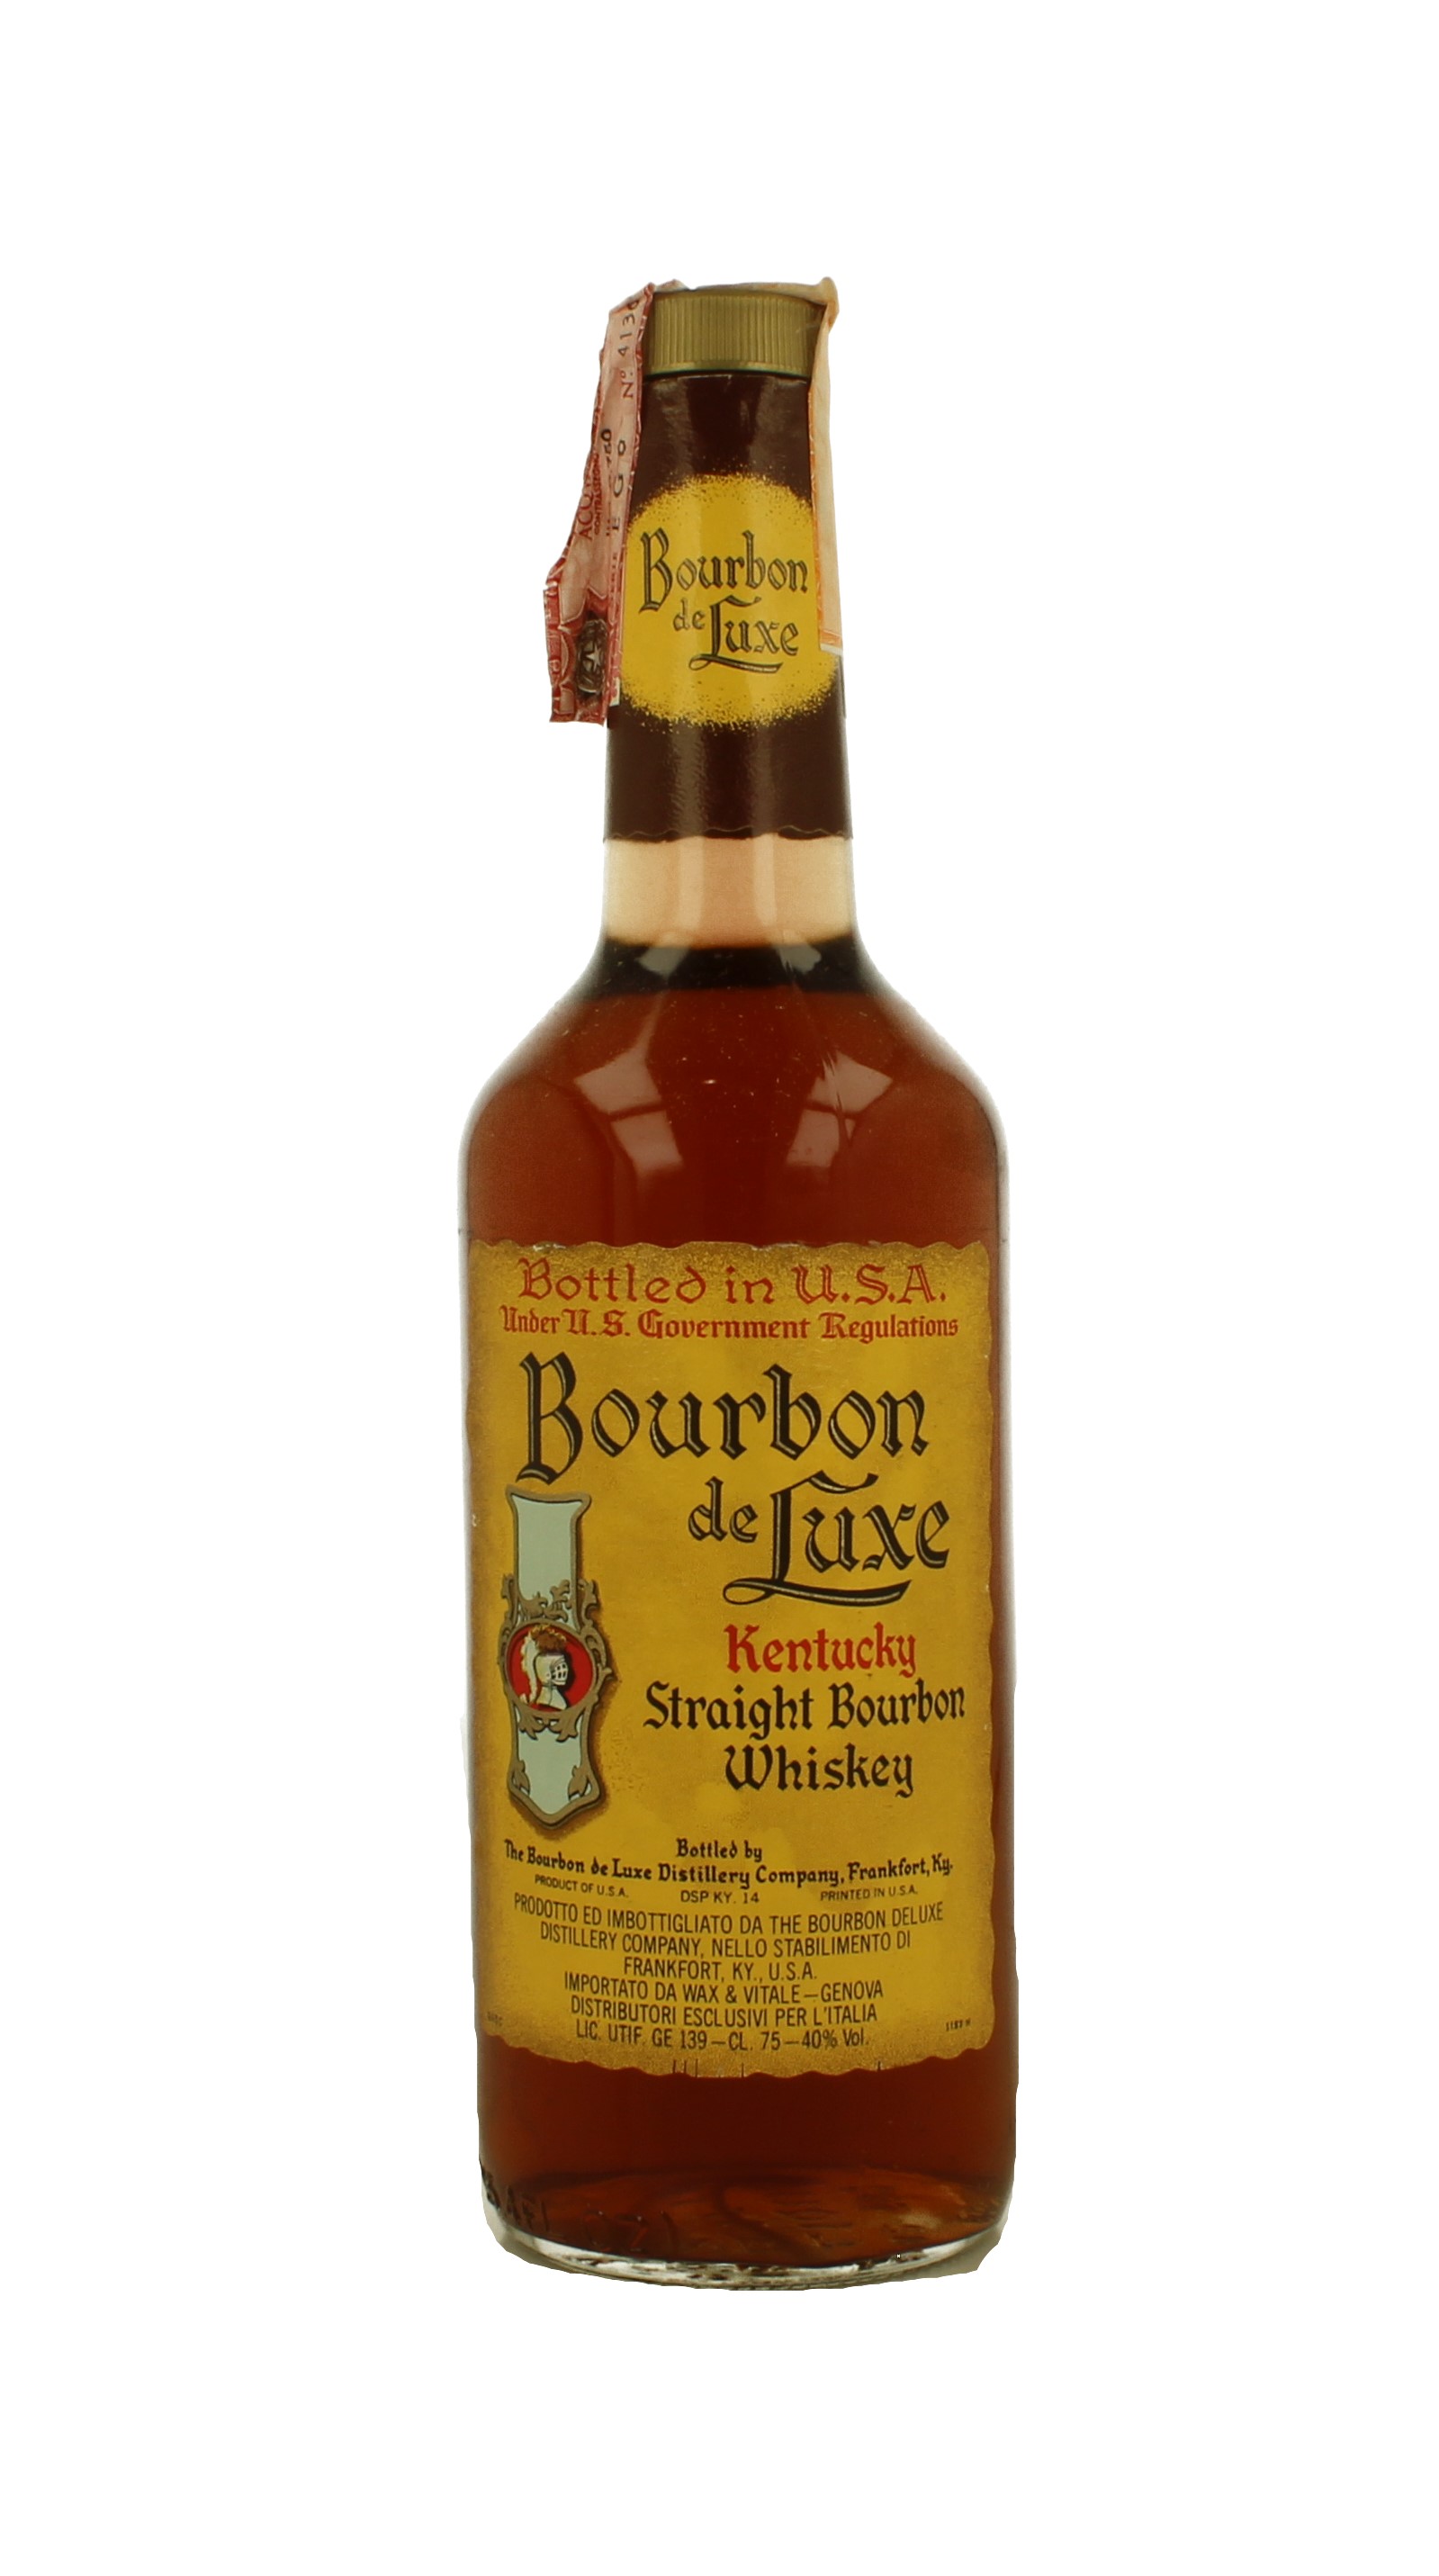 Bourbon De LUxe Kentucky Straight Whisky Whiskey 40% Spirits 75cl Bourbon 1980 - Bottled & - Antique, around Products Whisky